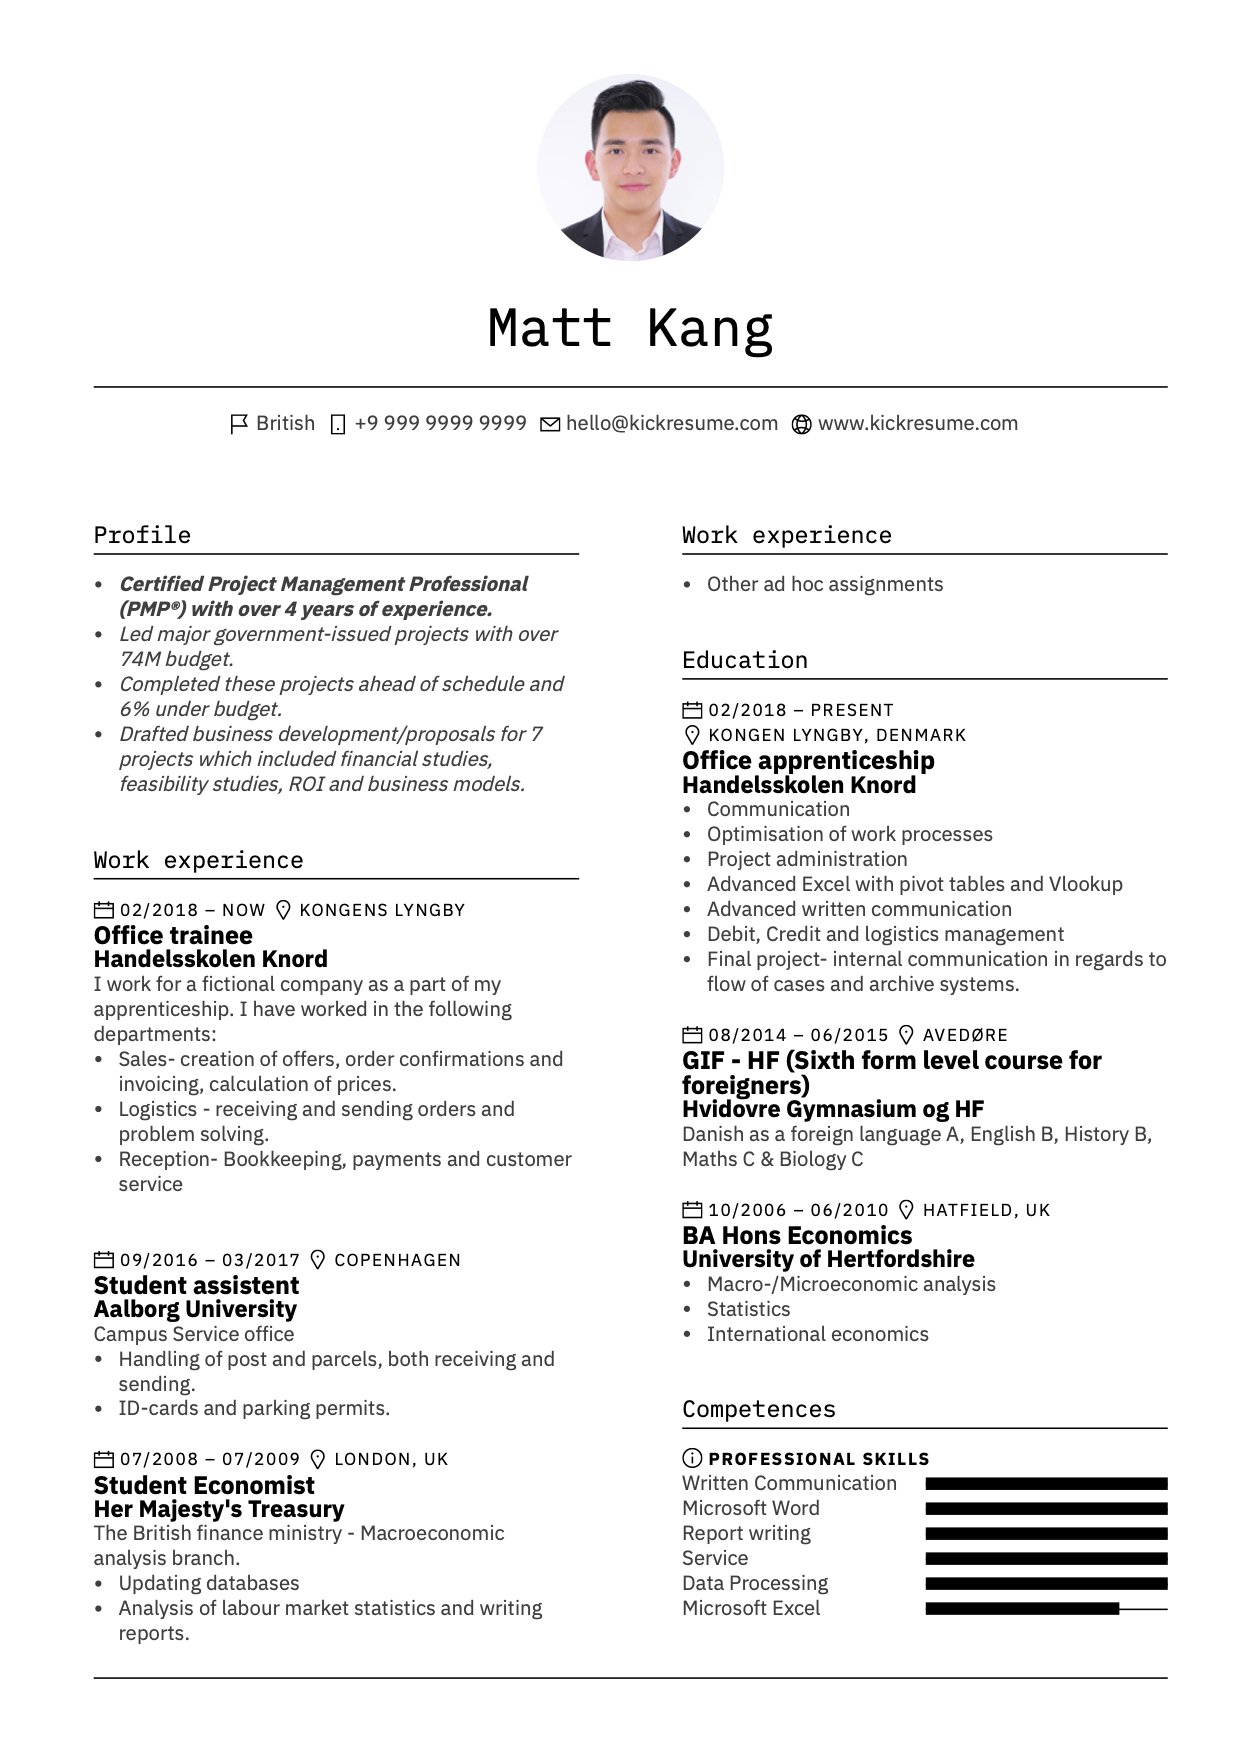 Resume Photo: Should You Put Your Picture on Your Resume?